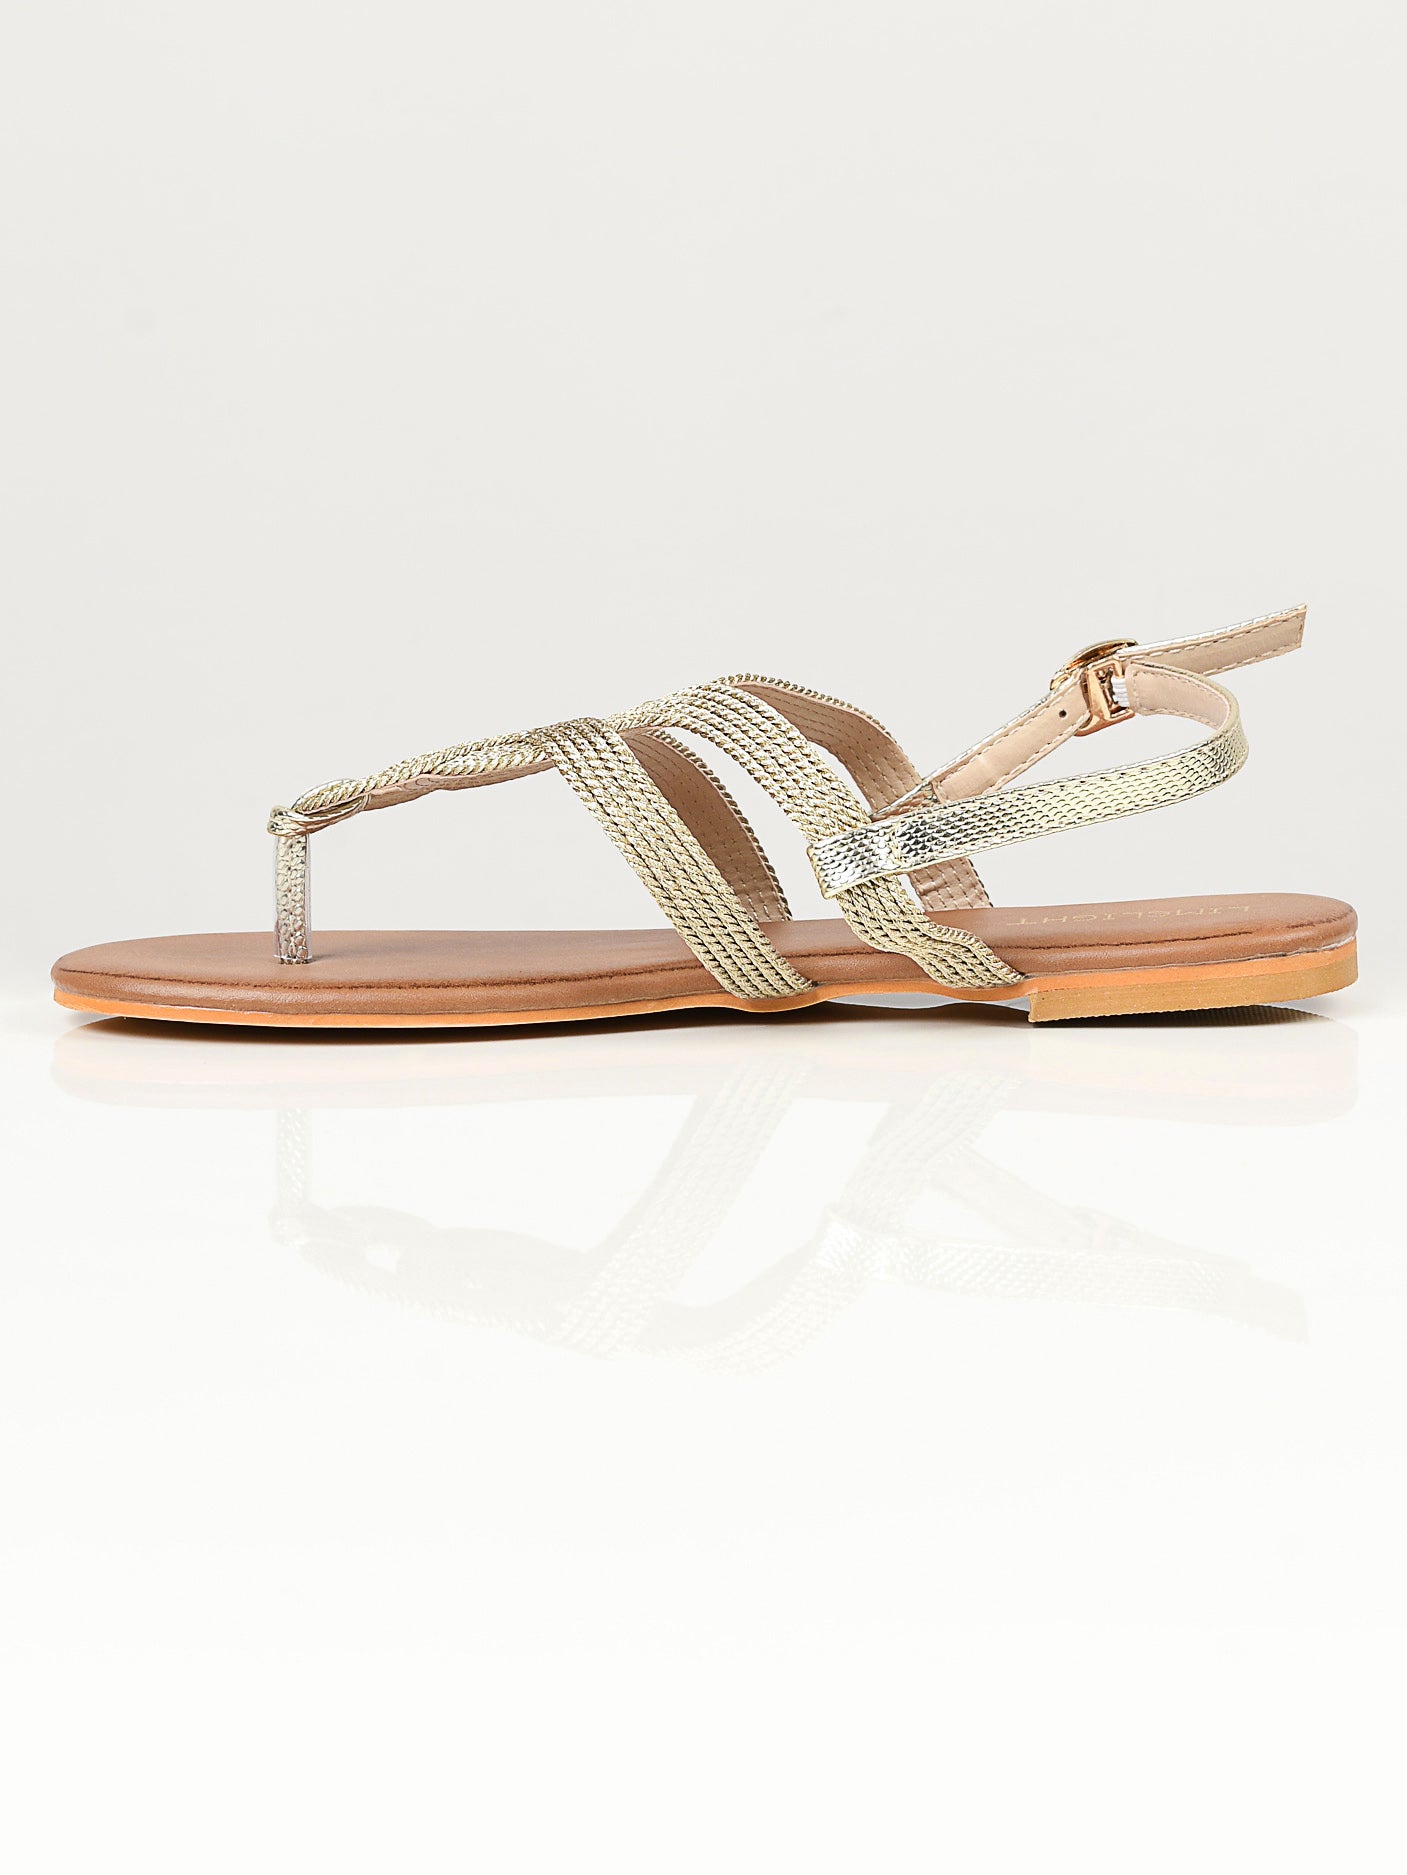 Shimmery Sandals - Gold